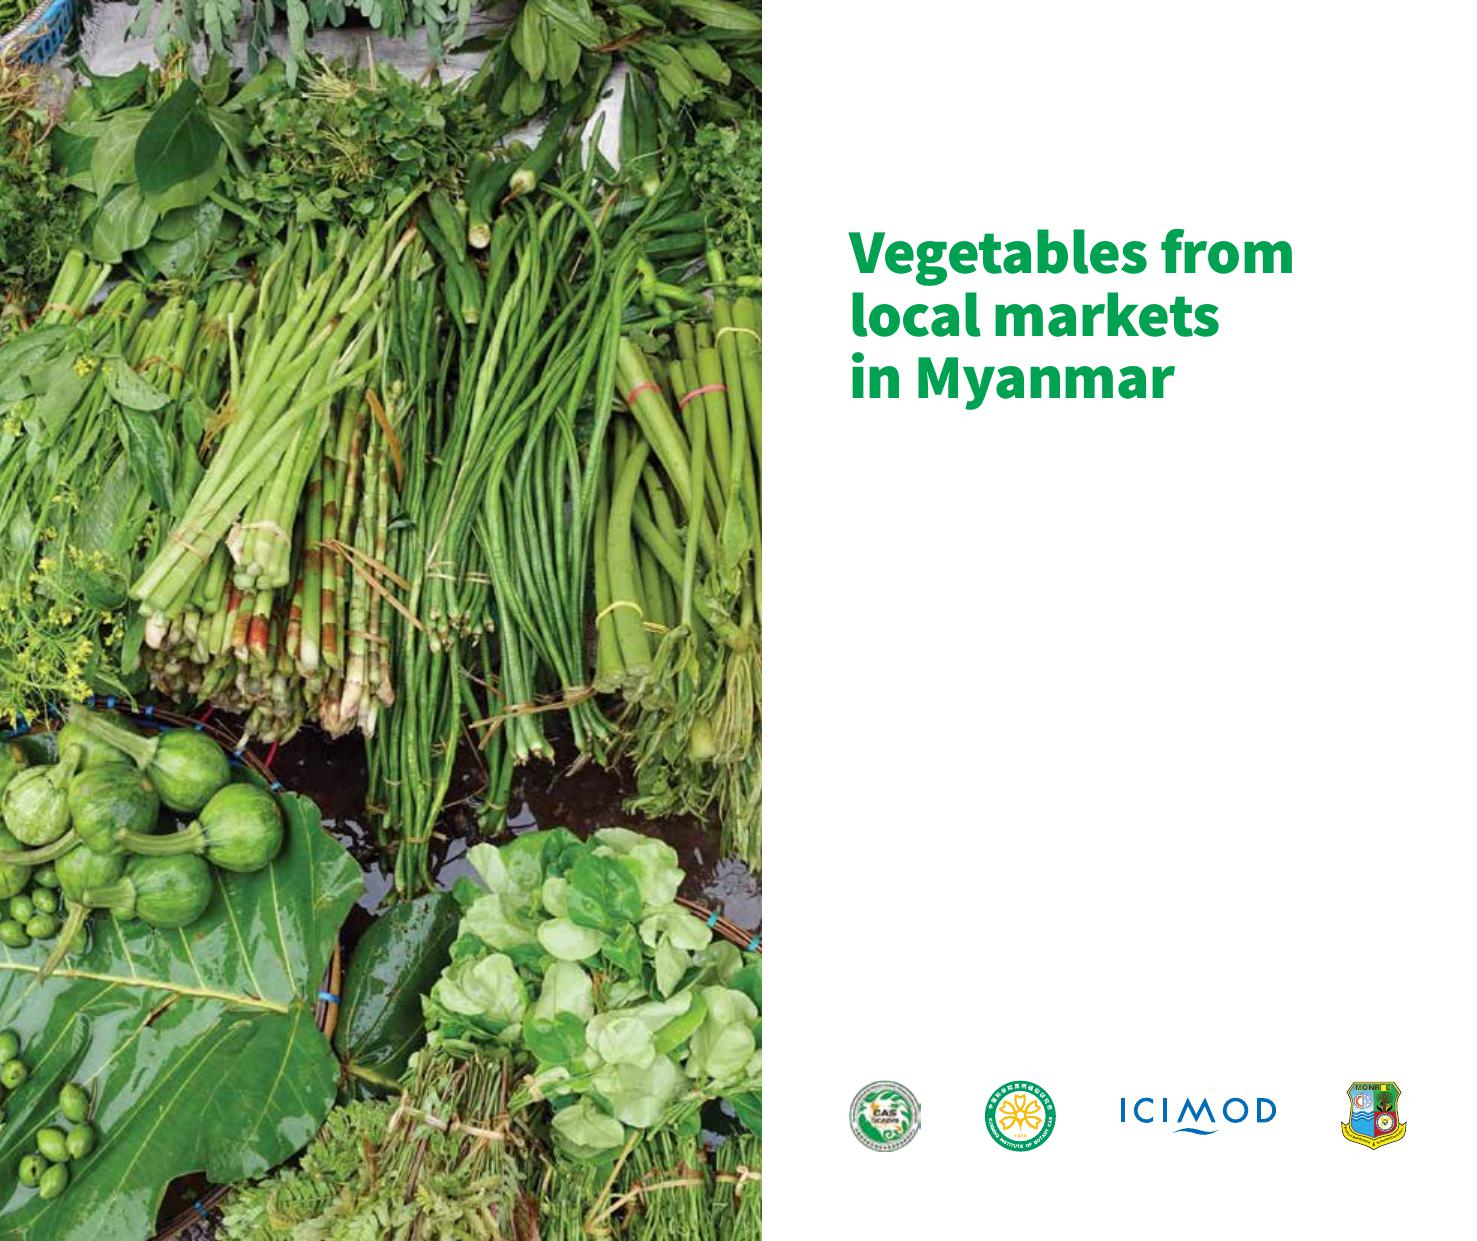 Vegetables from local markets in Myanmar